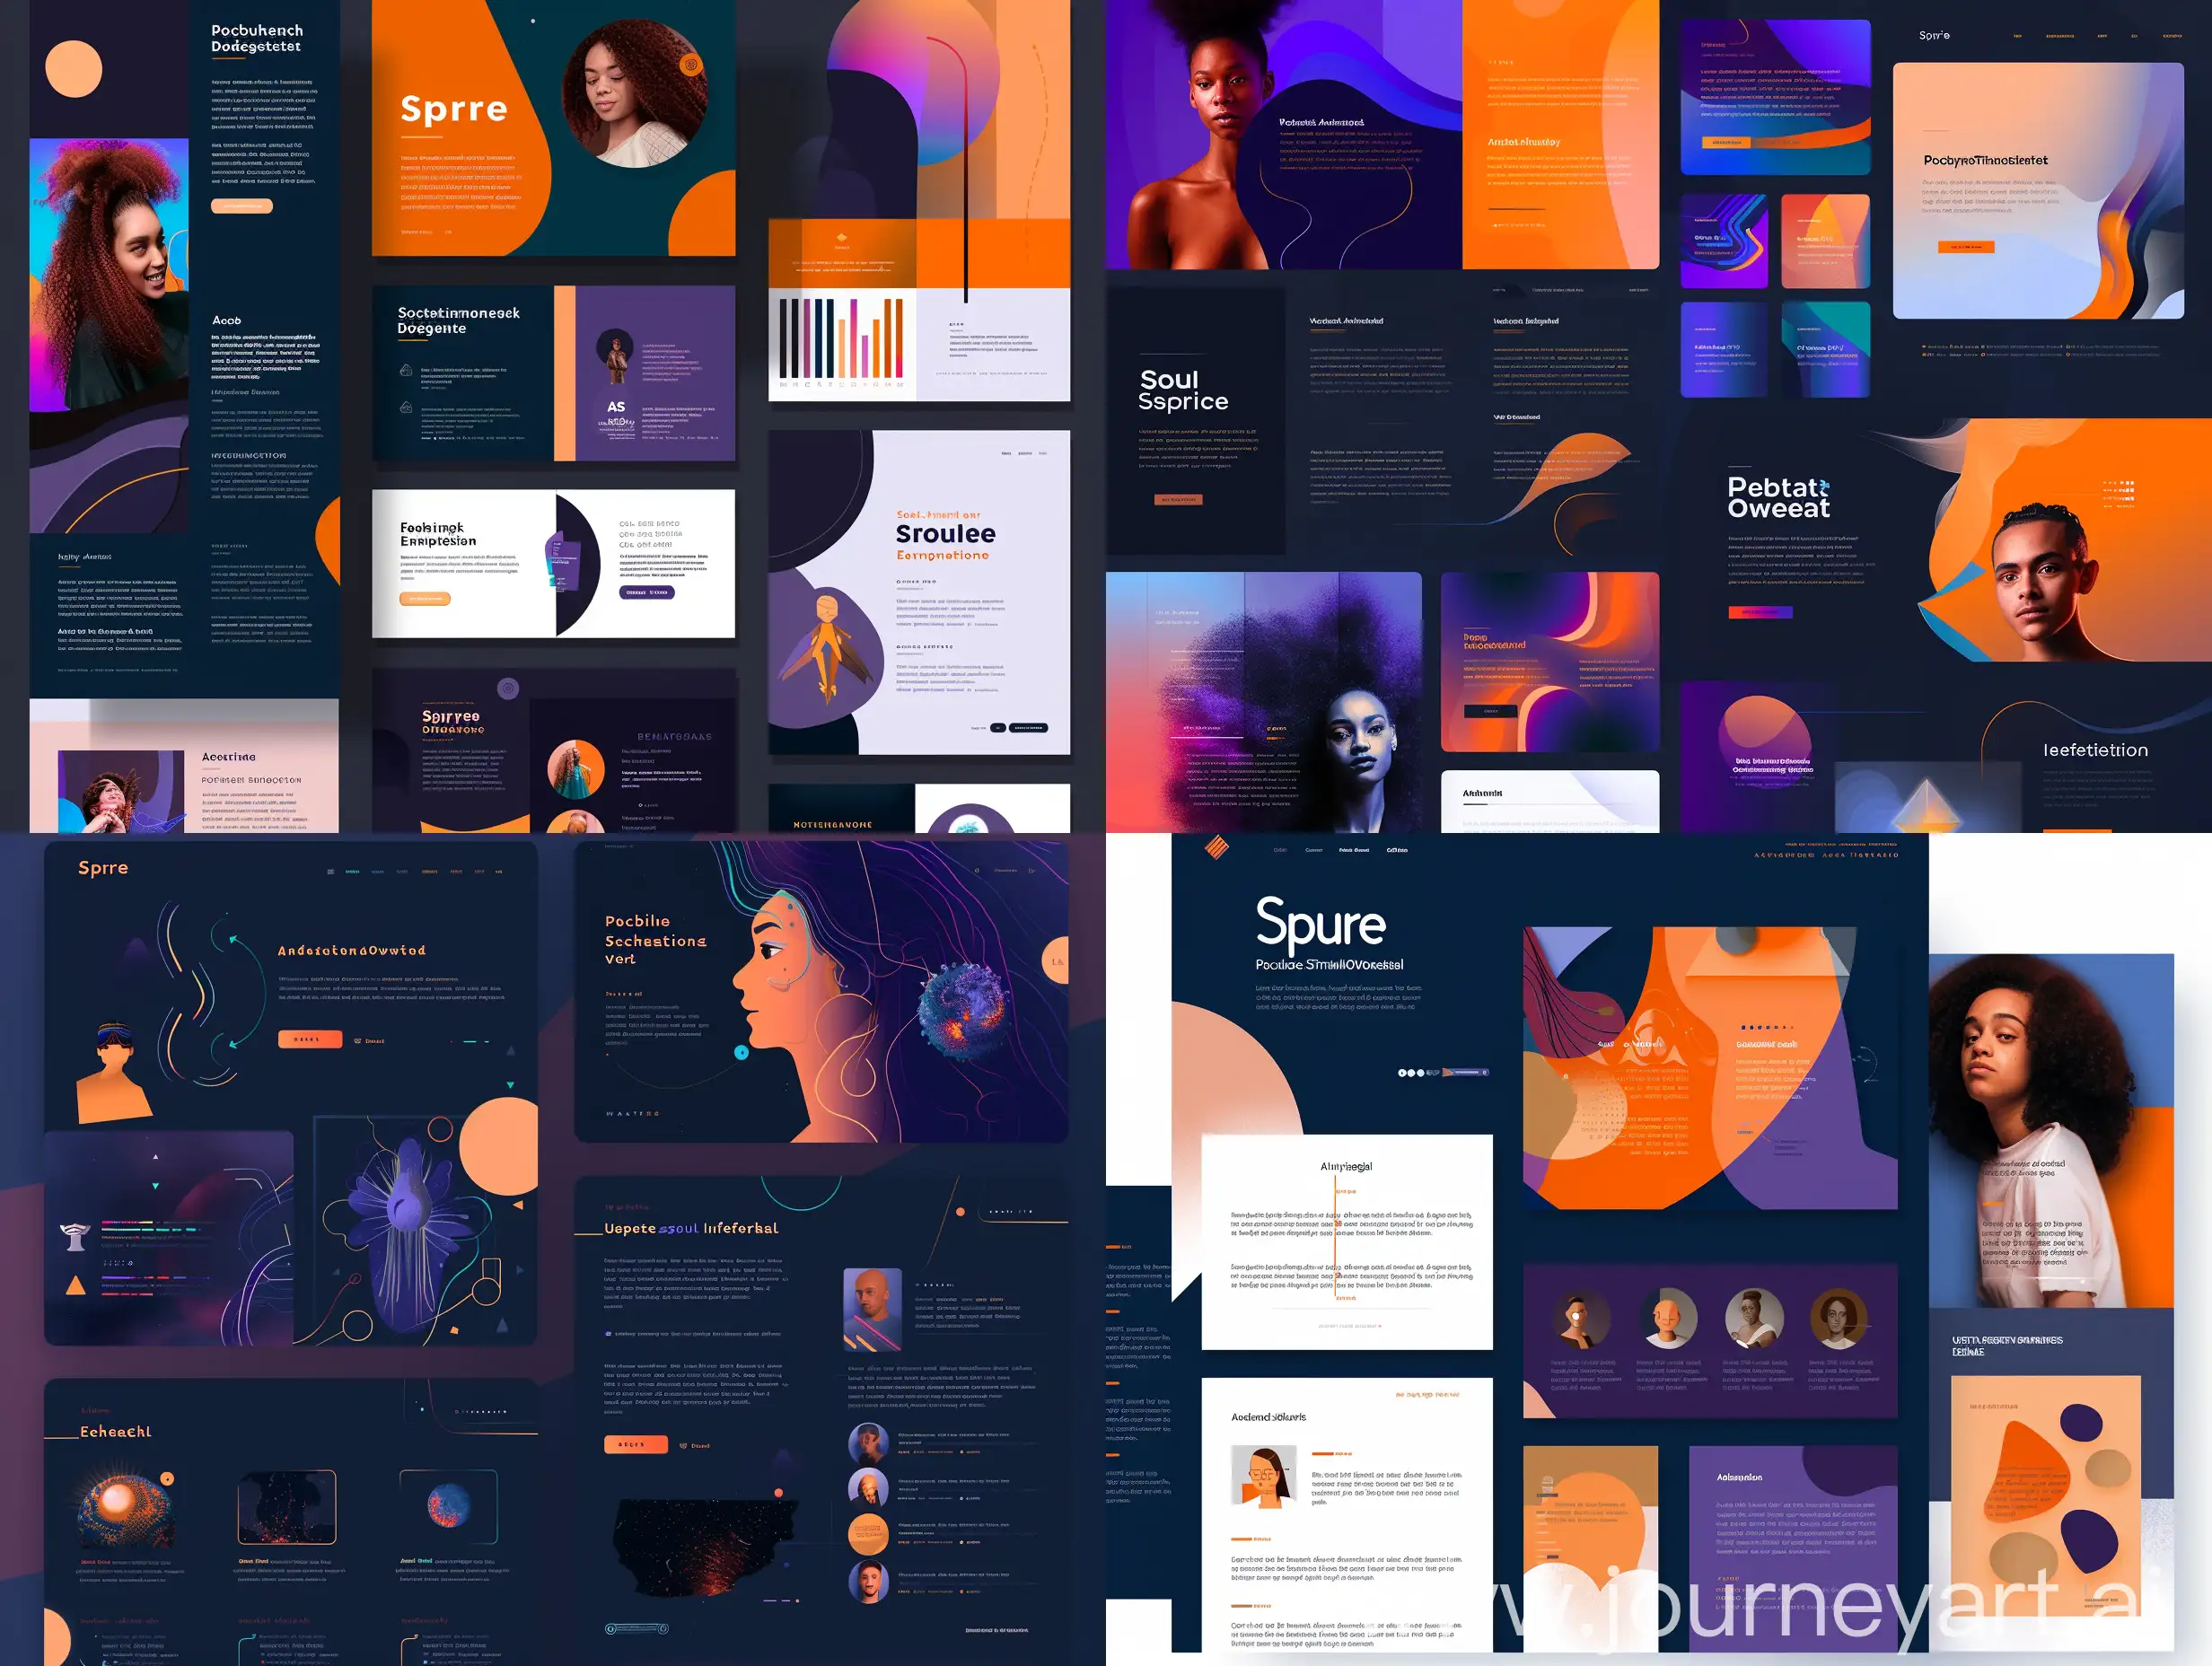 "Create a Behance case study template for 'Spire,' a global platform for industrial design students, inspired by the aesthetics of 'Soul' and 'Elemental.' The style should be modern, minimalistic, and professional with an artistic flair. Use a rich color palette of deep blues, purples, warm oranges, and subtle gradients. Typography should be clean and modern, such as Helvetica Neue, Avenir, or Montserrat. The template should include sections for Introduction, Problem Statement, Solution Overview, Character Introductions, User Journey, Interactive Elements, Testimonials, and Conclusion. Visual elements should combine flat design with subtle, elegant animations for depth and engagement."